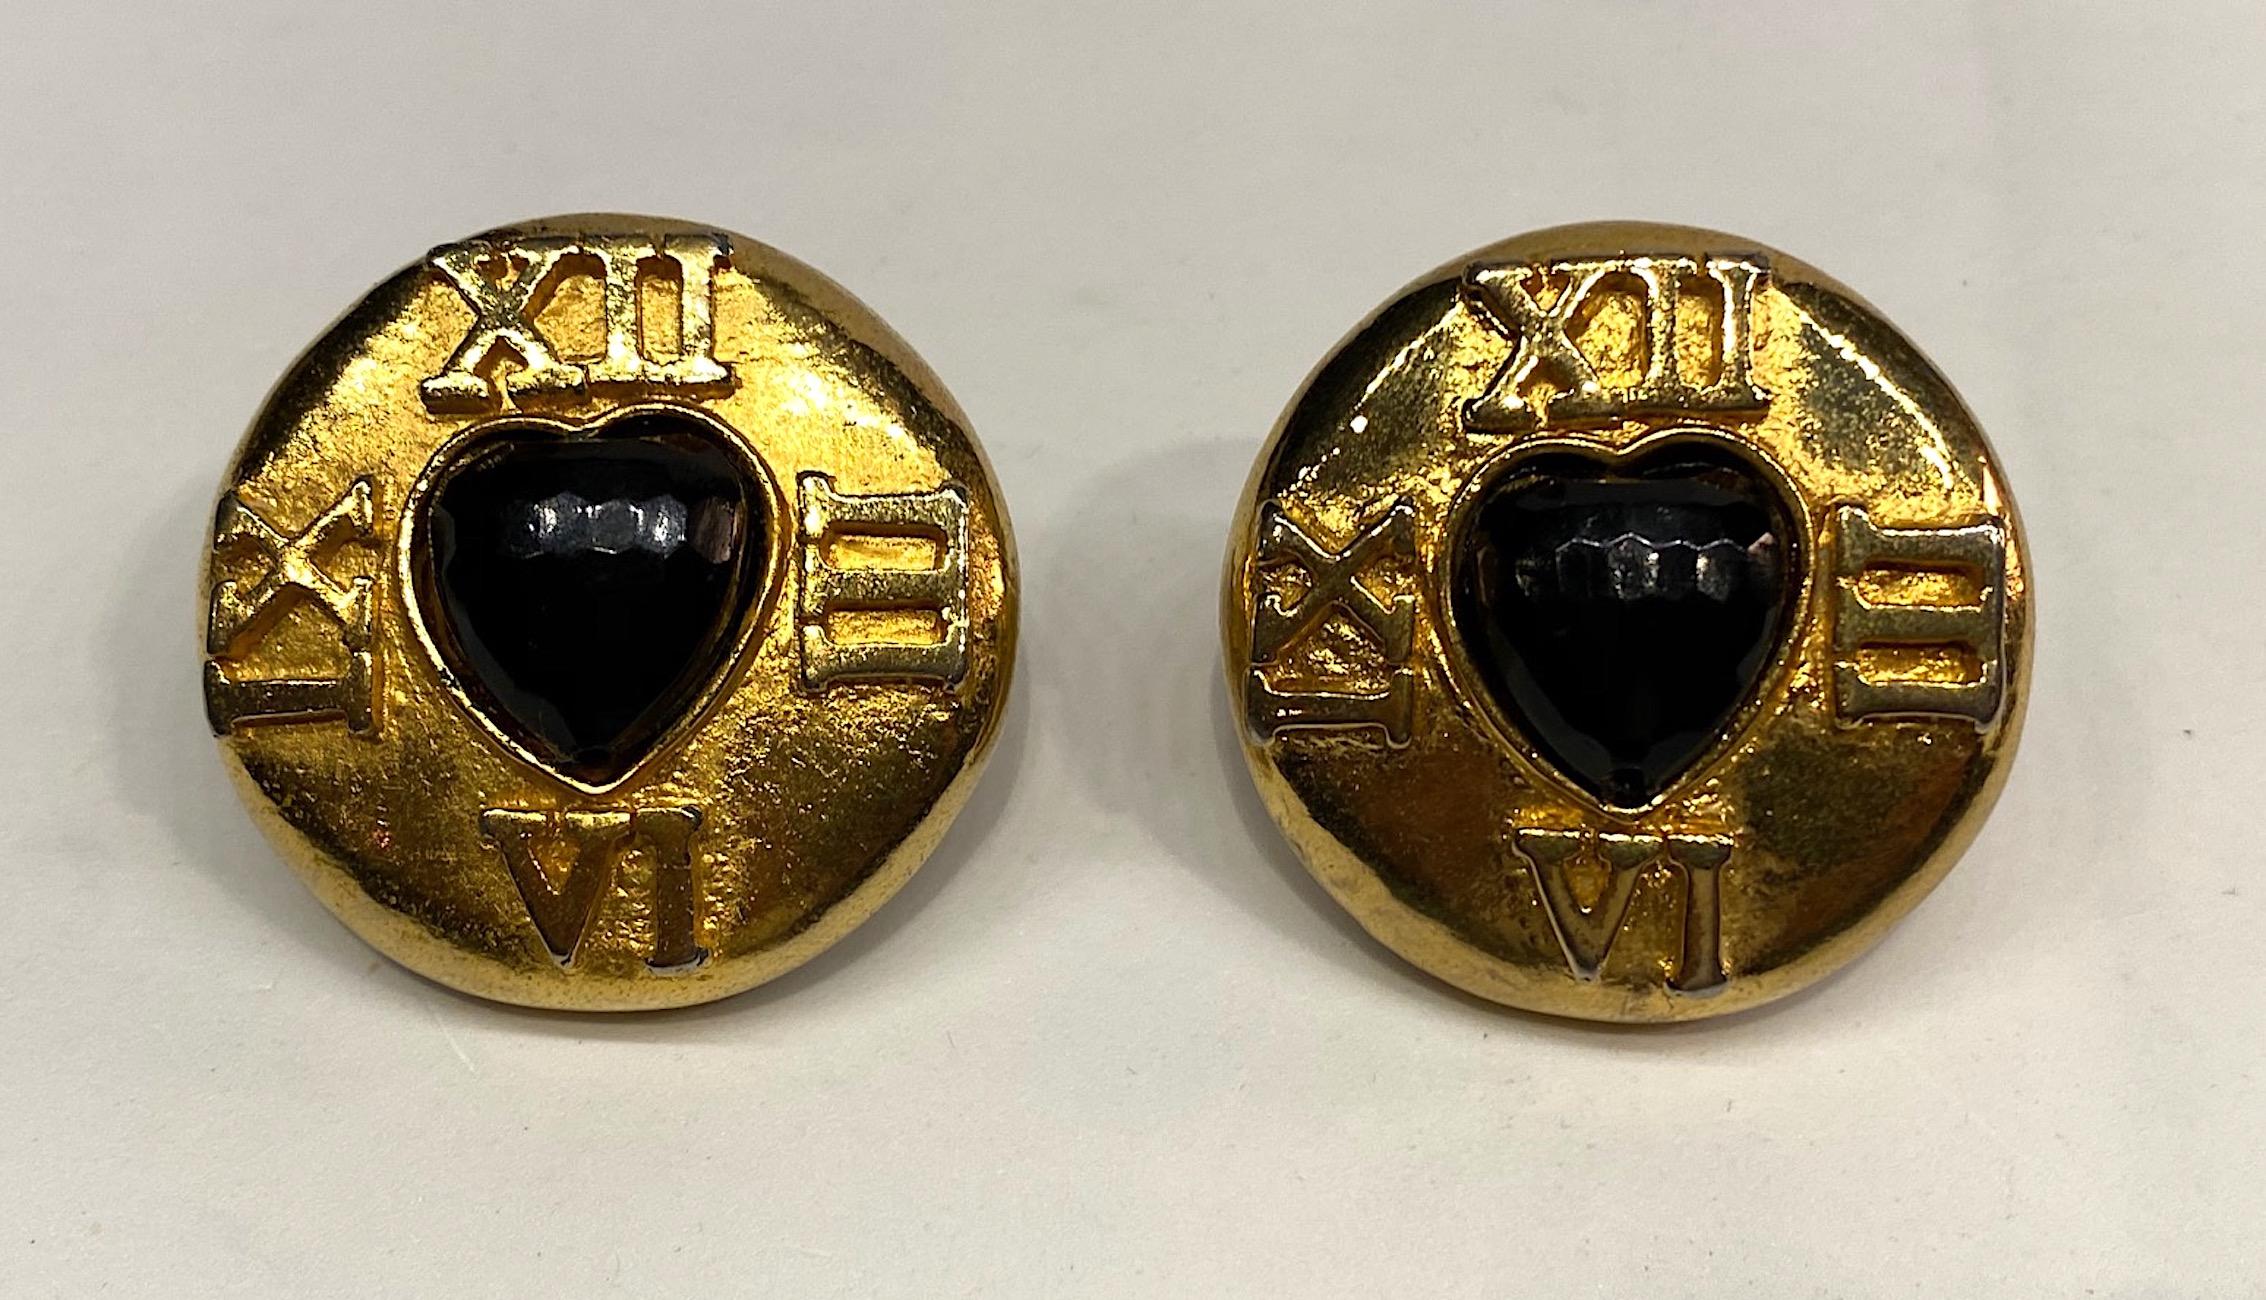 A large pair of 1980s Escada button earrings with heart shape stone. The earrings have a rich 18 carat gold plate and a central faceted black heart shape lucite stone. Surrounding the heart are the Roman numerals of 3, 6, 9 and 12 like a clock. Each